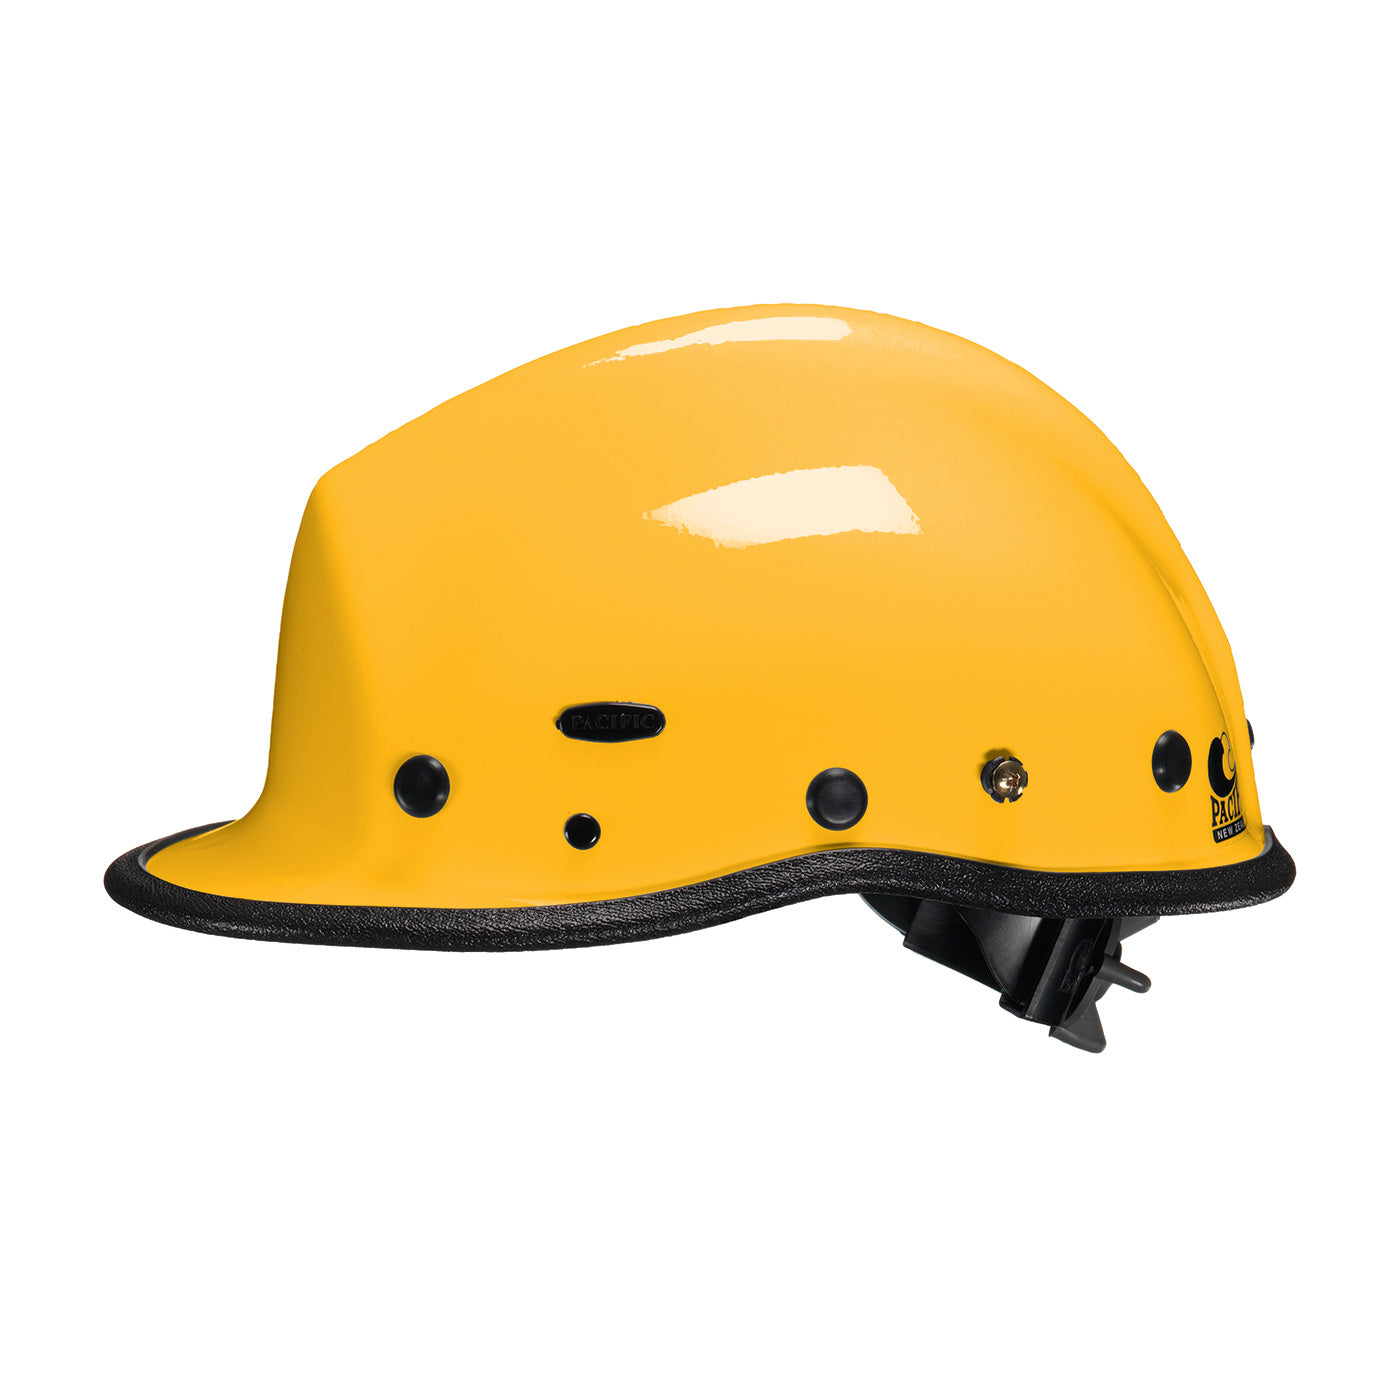 Protective Industrial Products-PACIFIC R5SL RESCUE HELMET-eSafety Supplies, Inc